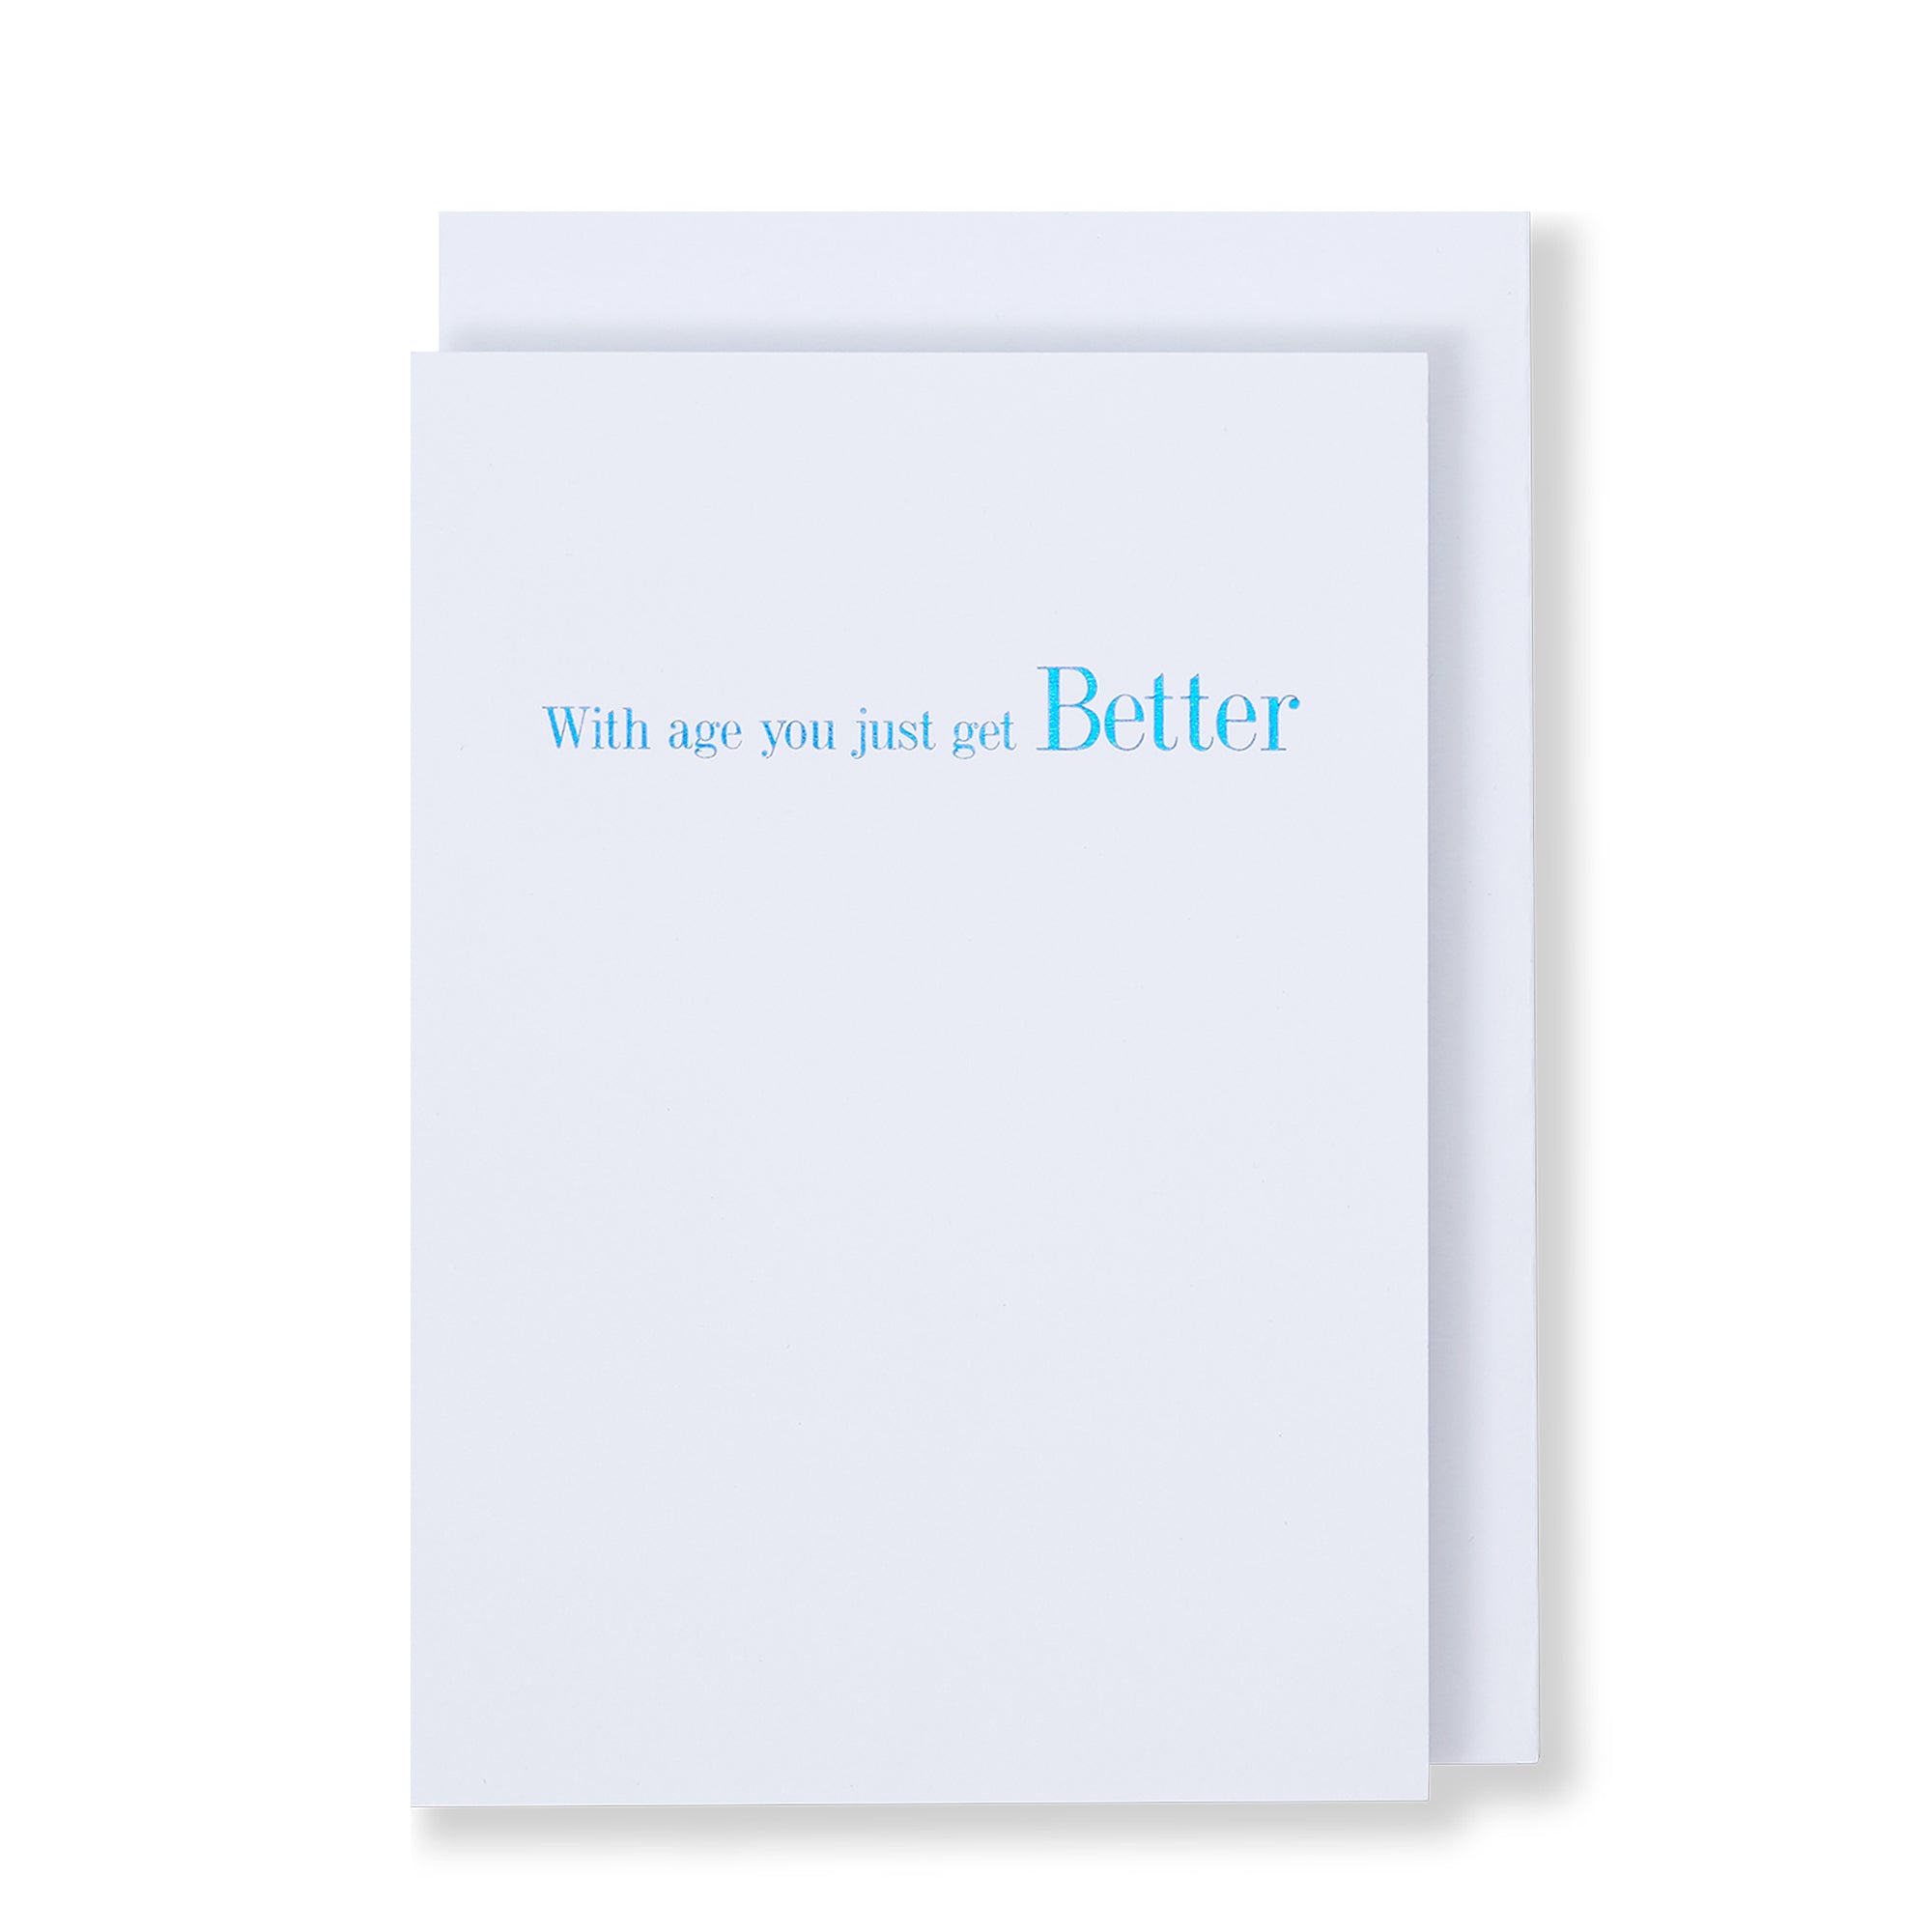 With Age You Just Get Better Greeting Card in White, Front